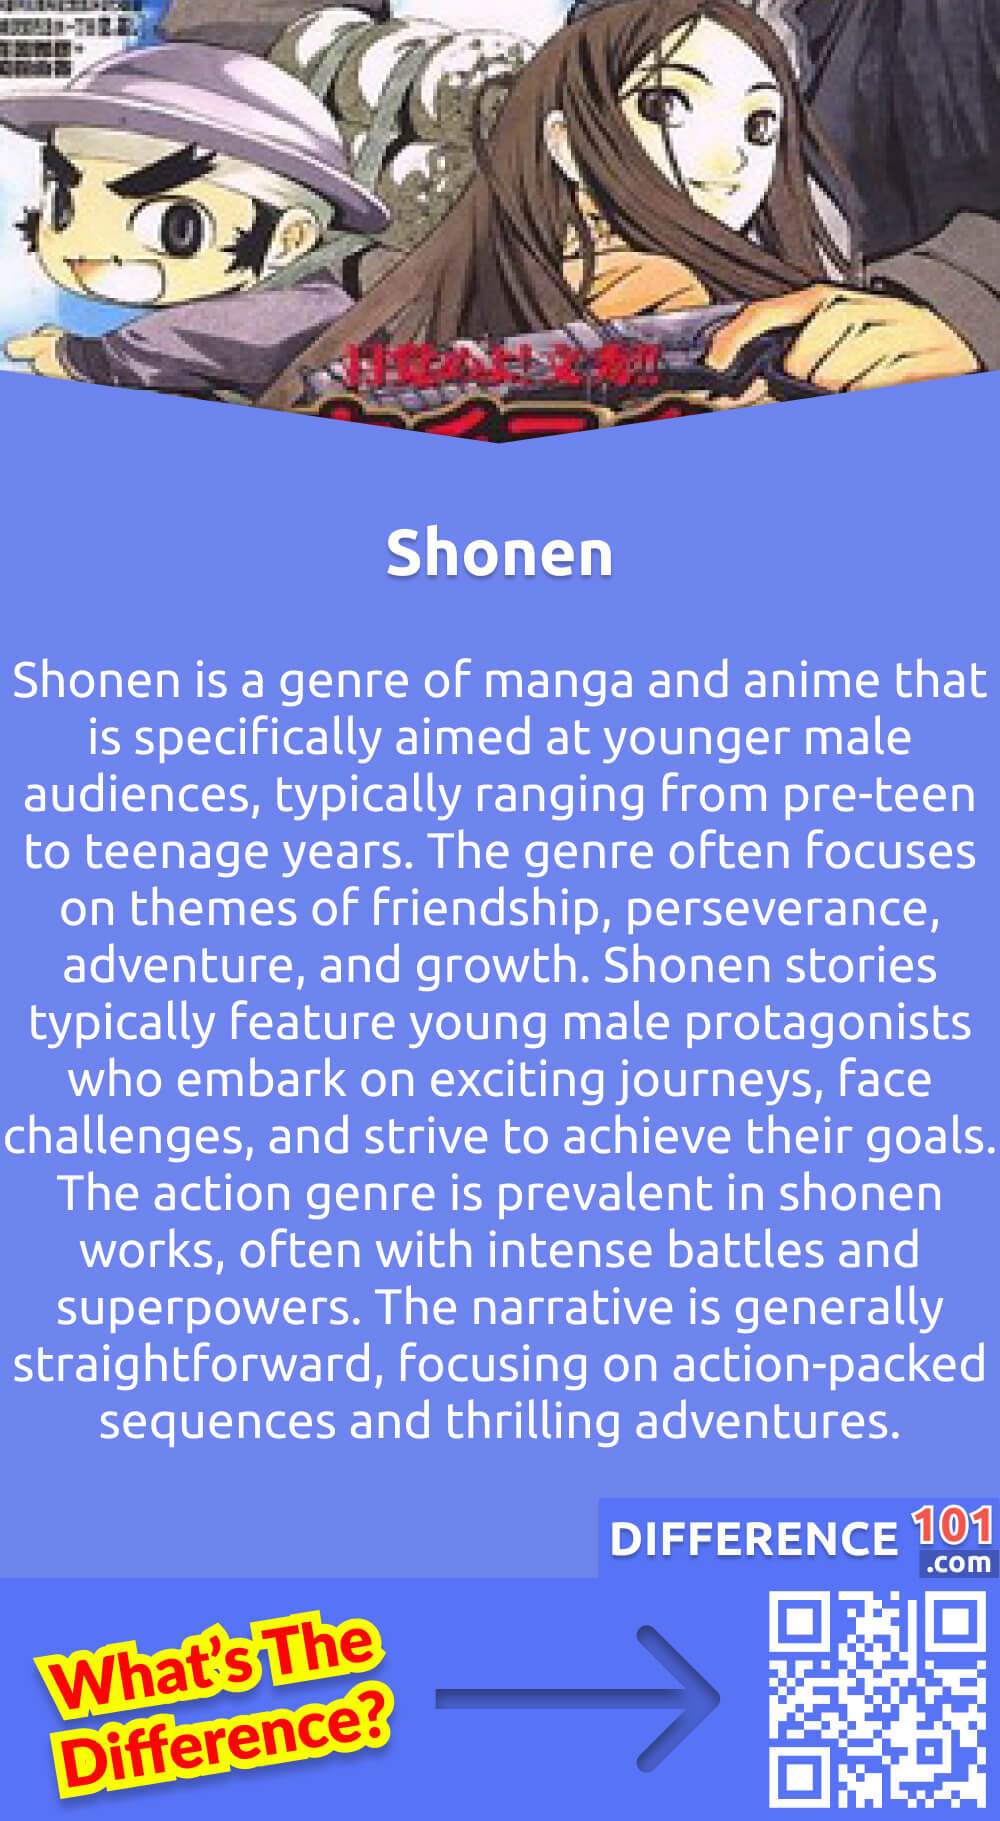 What Is Shonen? Shonen is a genre of manga and anime that is specifically aimed at younger male audiences, typically ranging from pre-teen to teenage years. The genre often focuses on themes of friendship, perseverance, adventure, and growth. Shonen stories typically feature young male protagonists who embark on exciting journeys, face challenges, and strive to achieve their goals. The action genre is prevalent in shonen works, often with intense battles and superpowers. The narrative is generally straightforward, focusing on action-packed sequences and thrilling adventures. This genre is known for its energetic art style and vibrant characters, making it a popular choice among younger audiences.